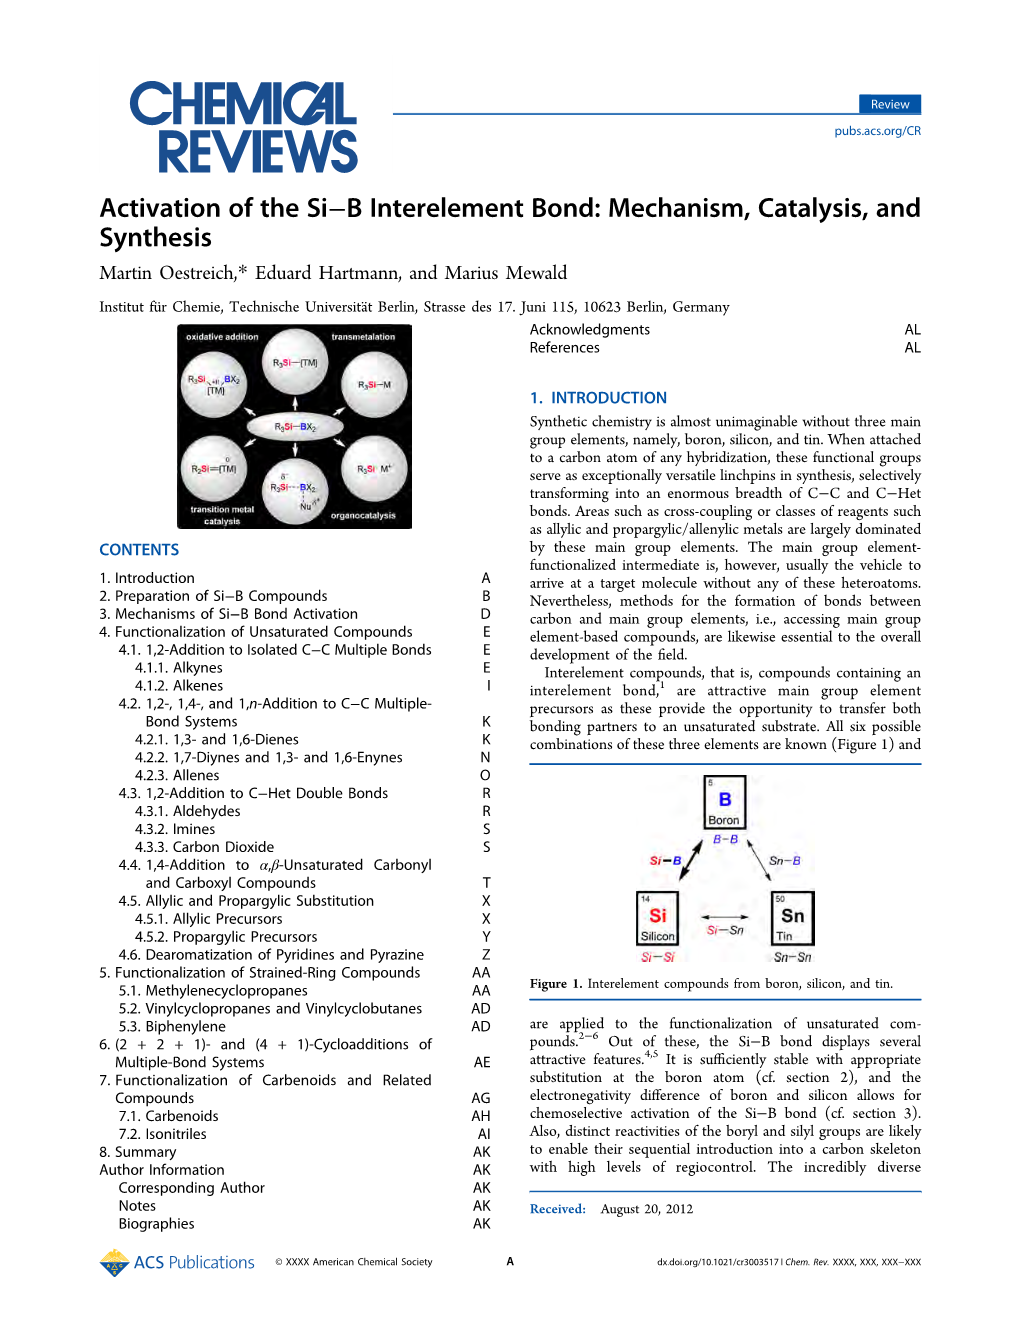 Activation of the Si−B Interelement Bond: Mechanism, Catalysis, and Synthesis Martin Oestreich,* Eduard Hartmann, and Marius Mewald